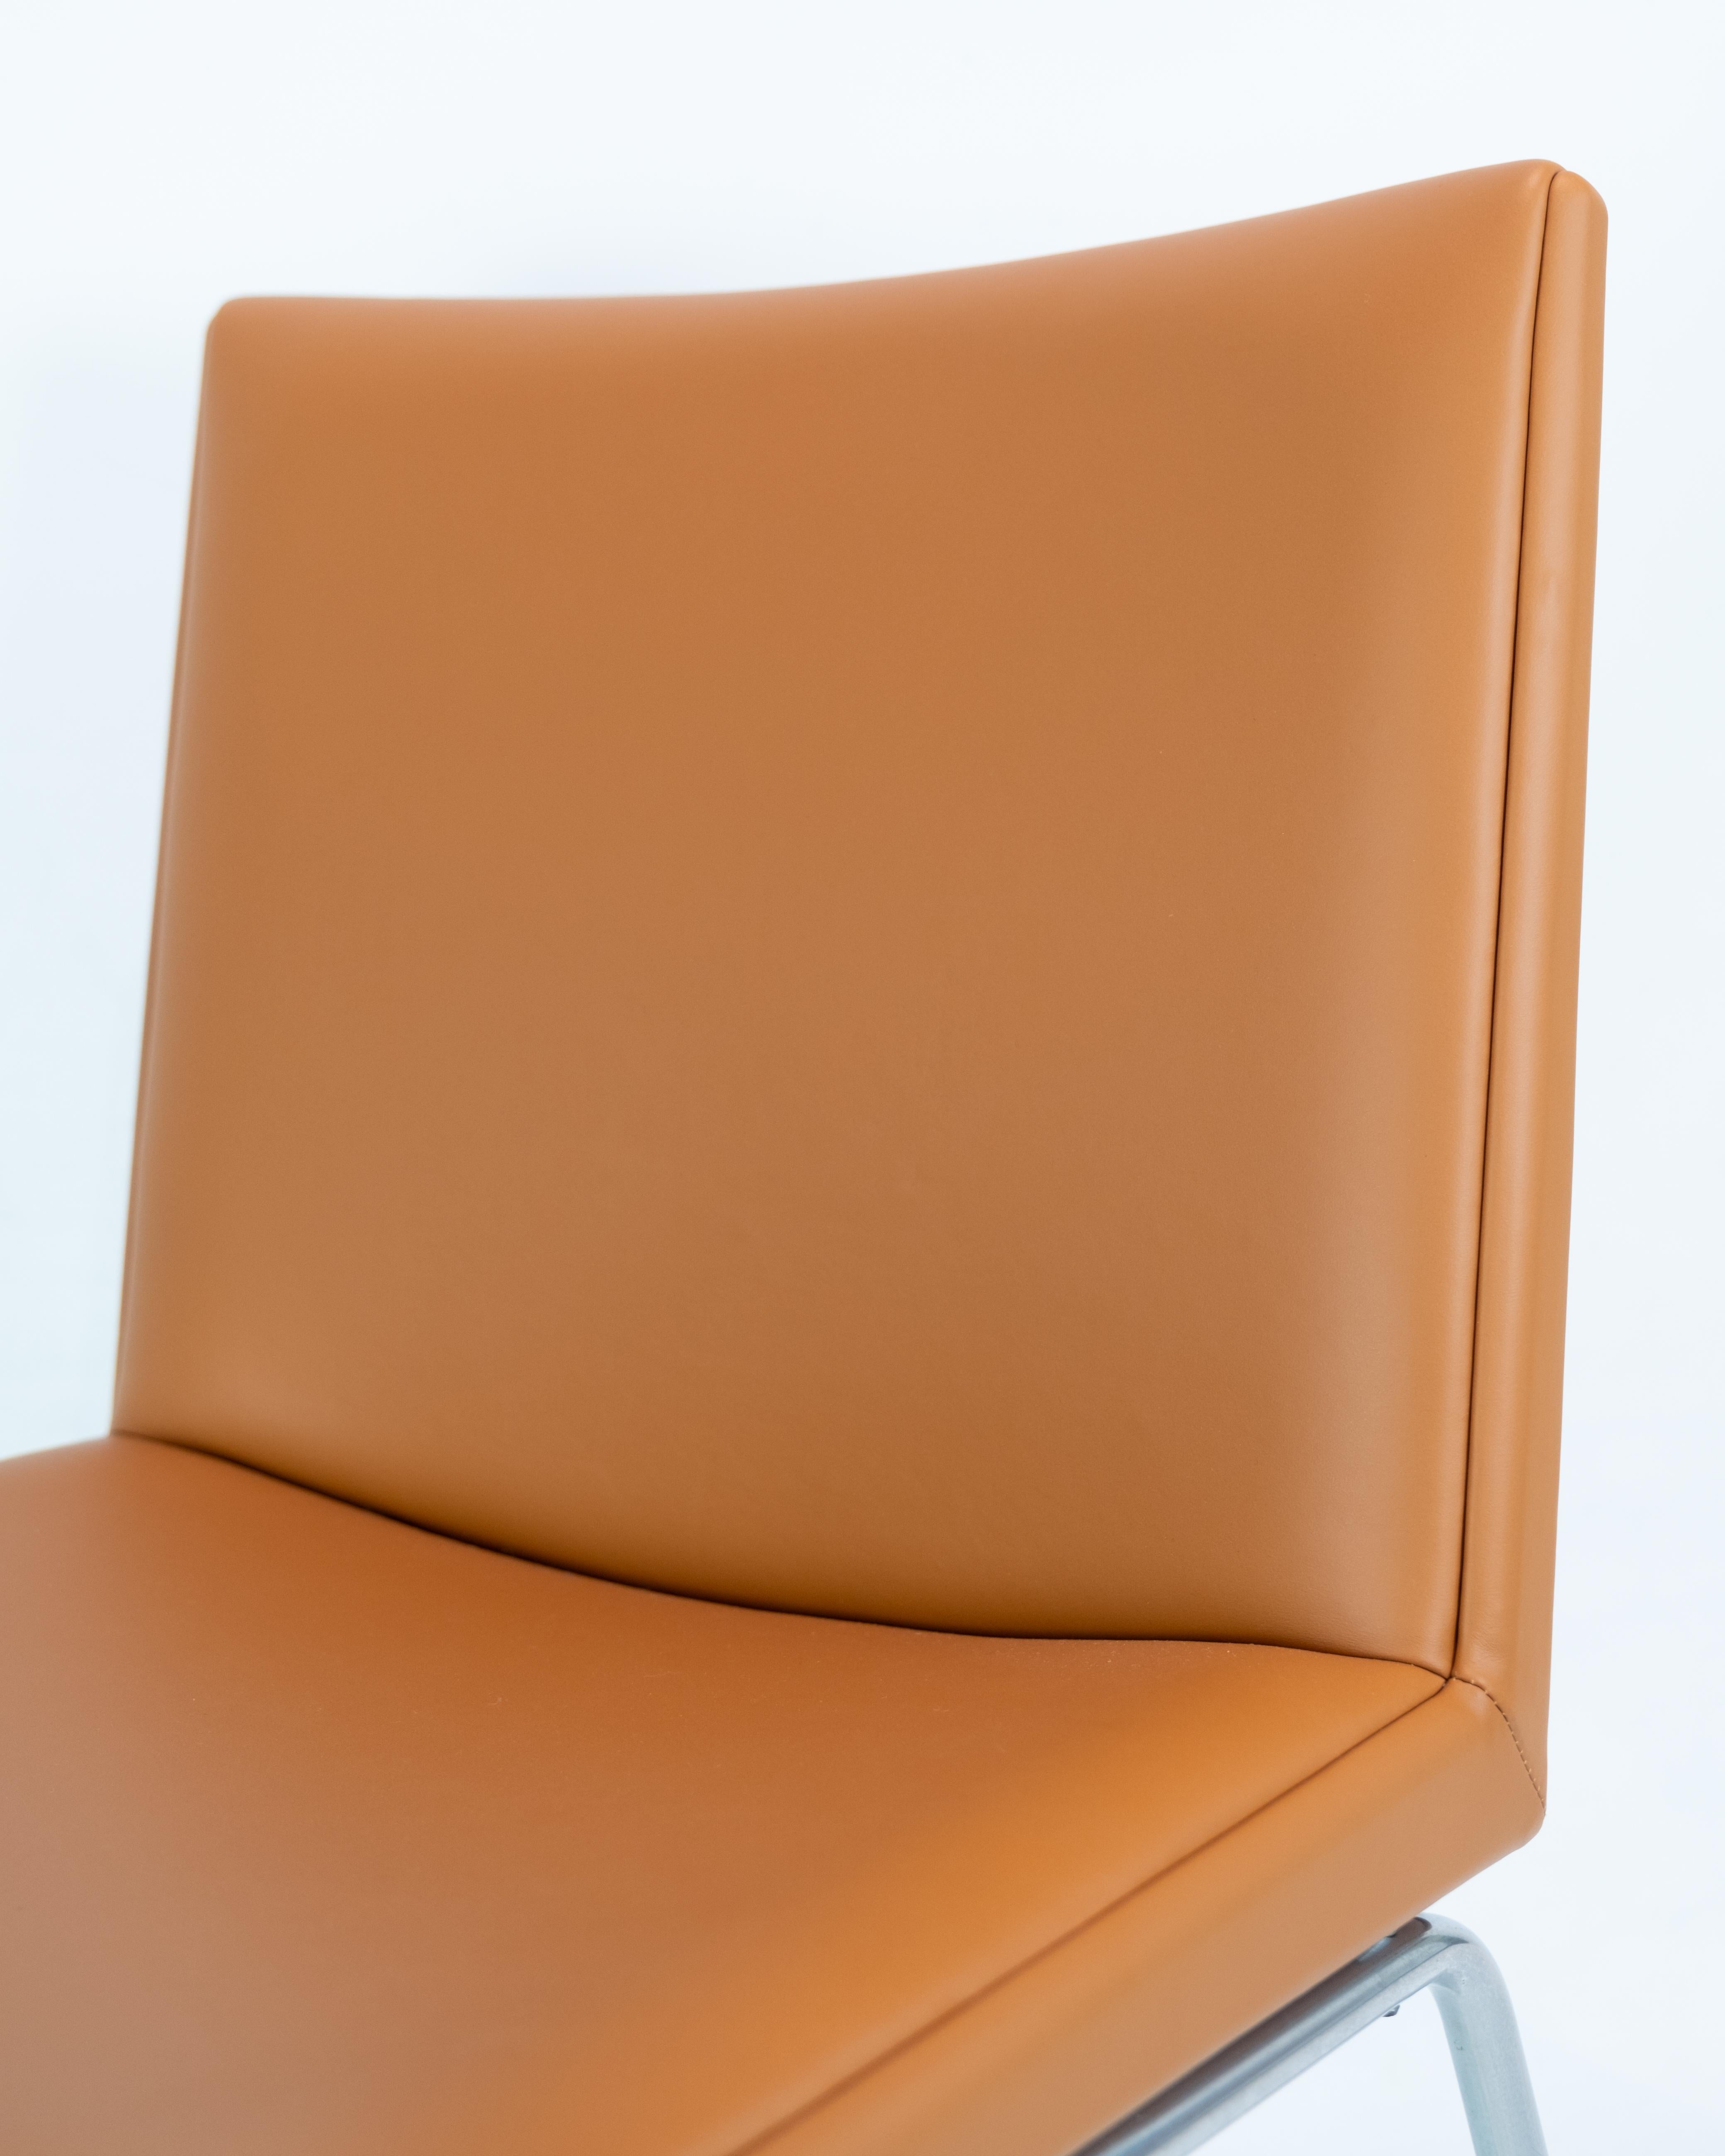 Late 20th Century Kastrup Chair In Cognac Leather Model AP40 By Hans J. Wegner  For Sale